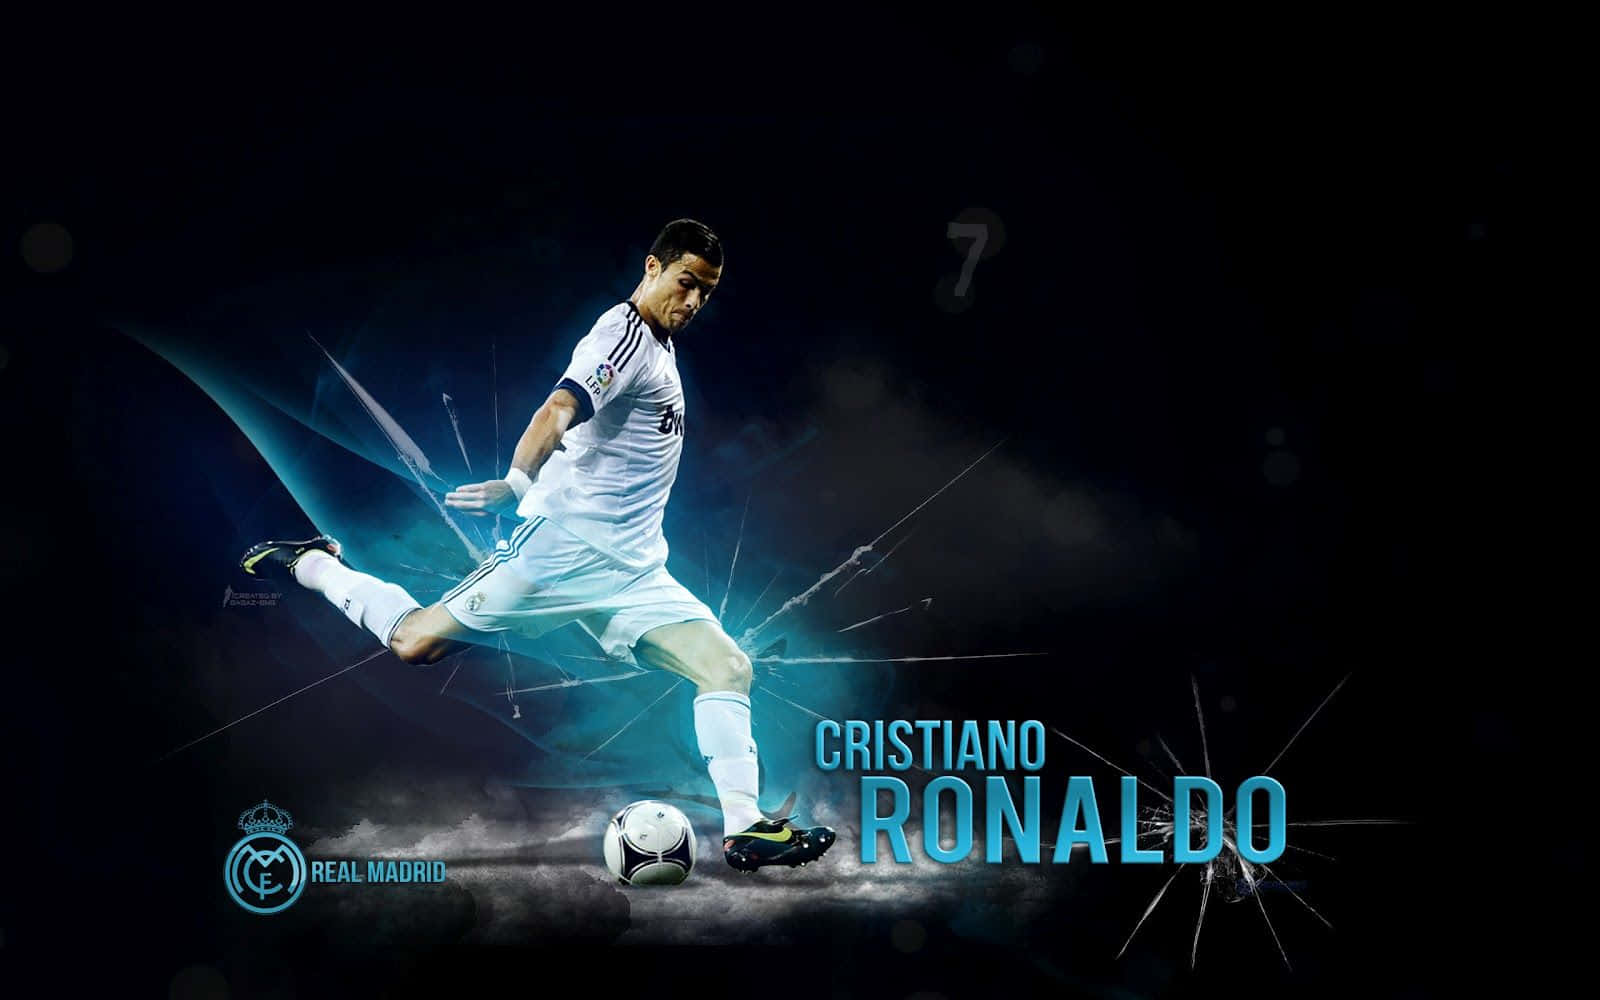 Soccer giant, Cristiano Ronaldo, perfects his art on the field